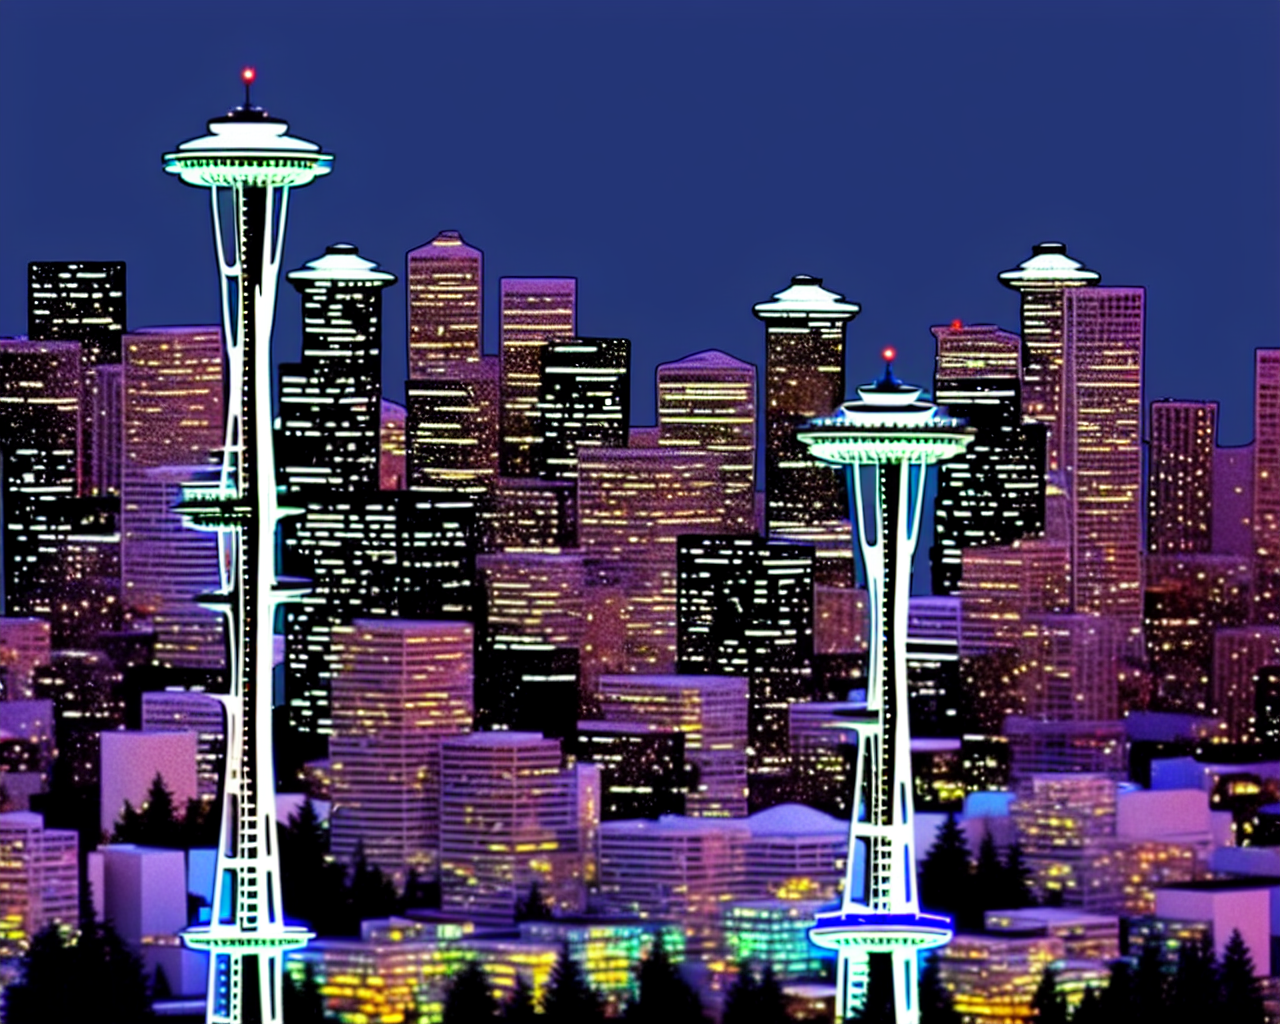 00070-1550711715-one_seattle_space_needle_photo_realistic.png